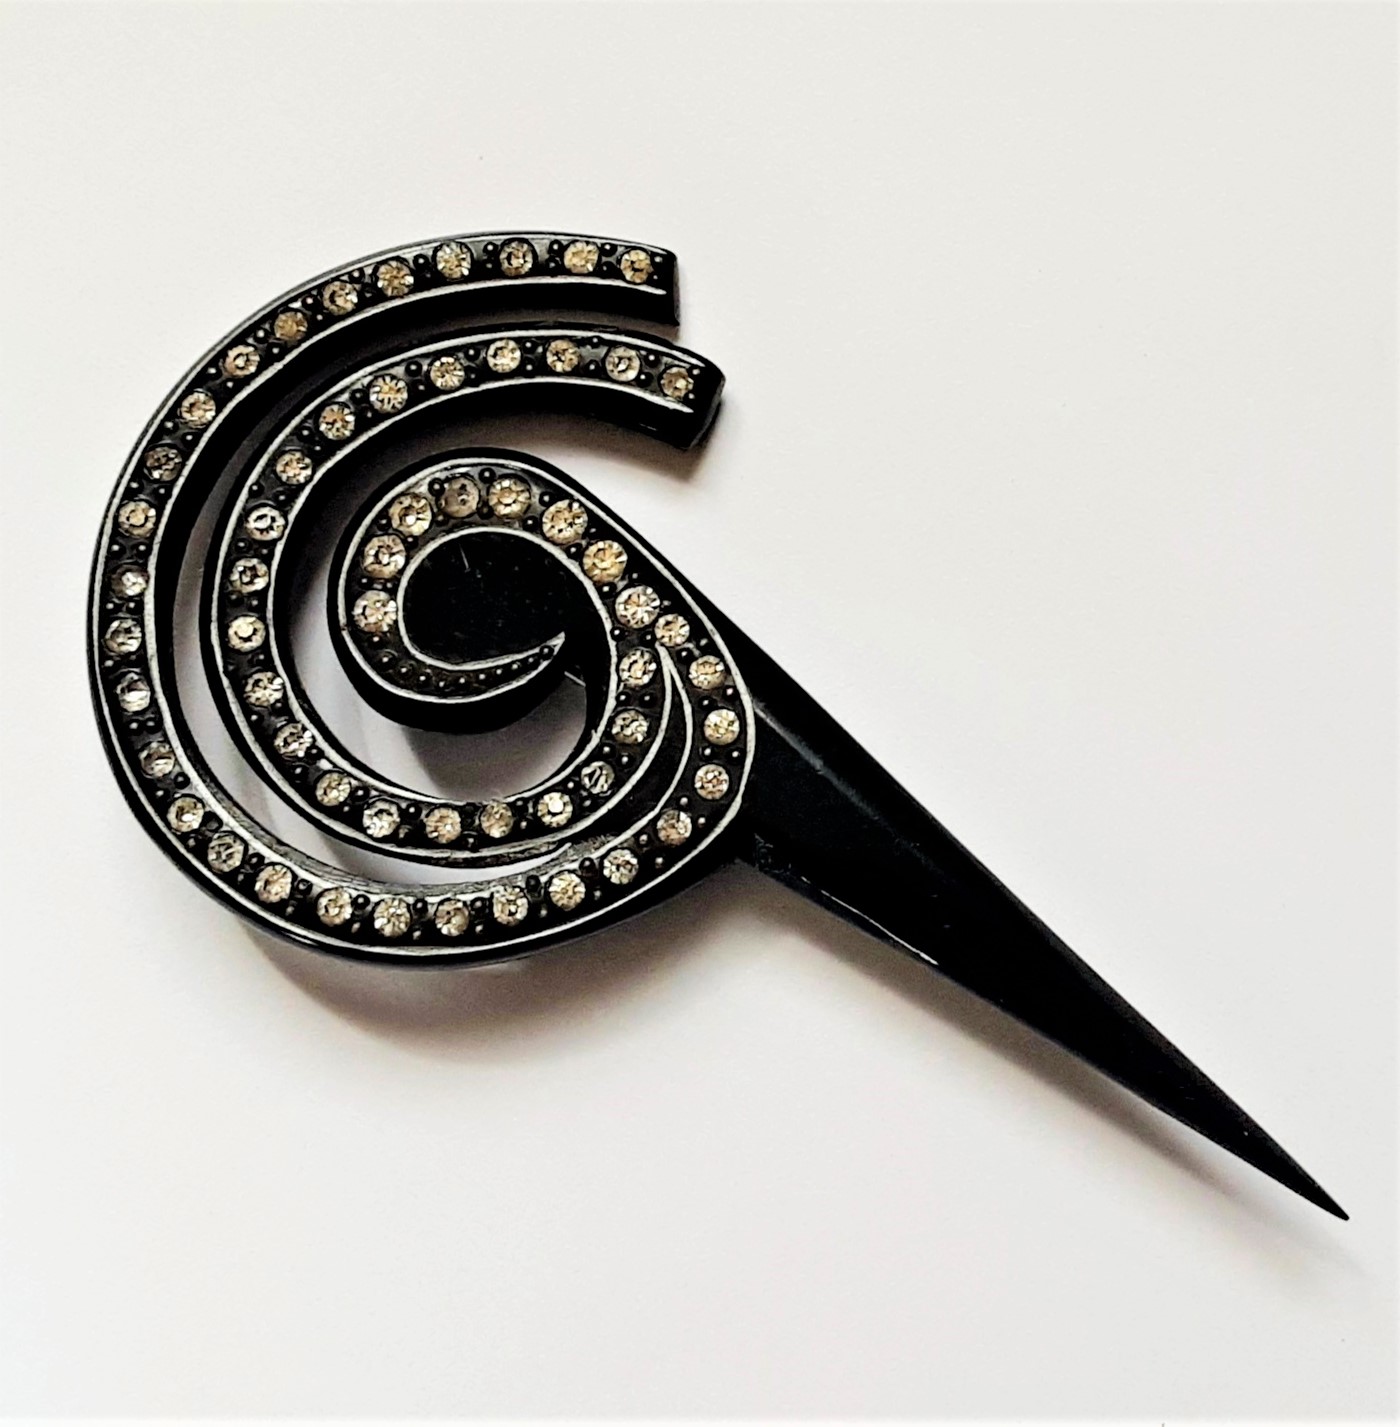 Deco celluloid hat pin